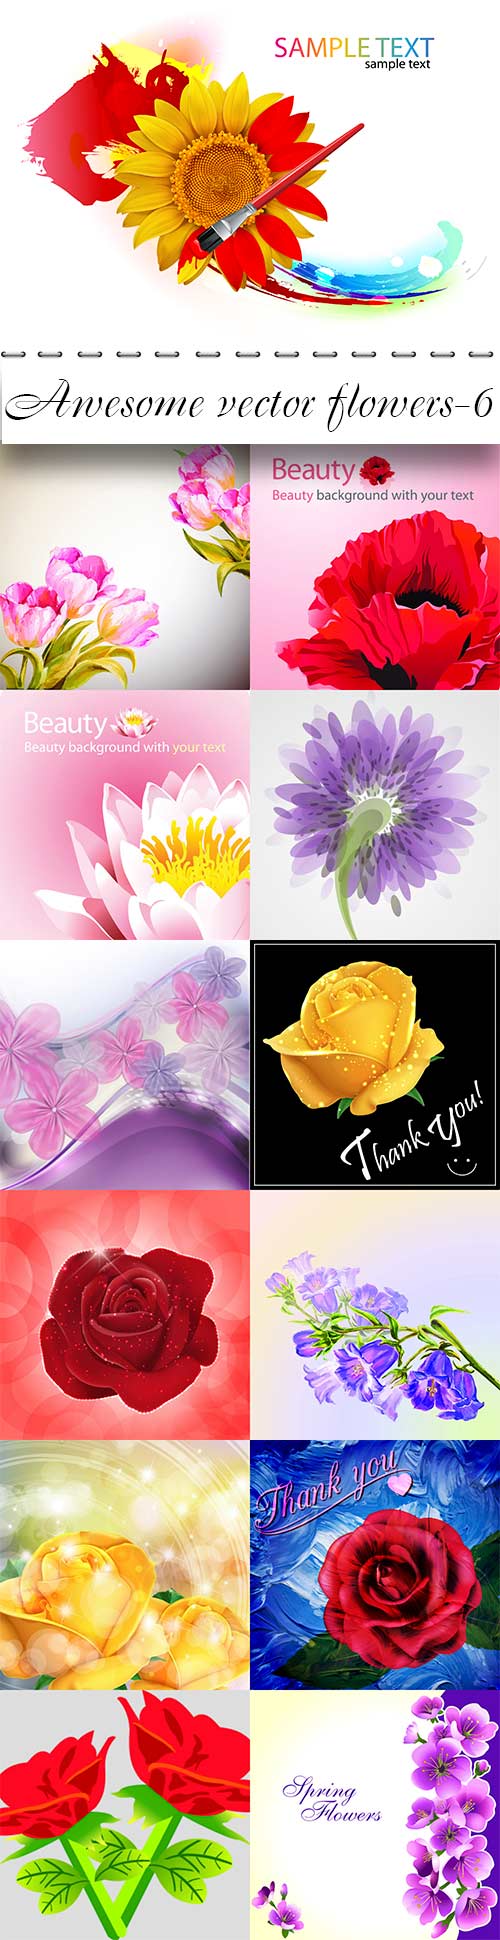 Awesome vector flowers-6